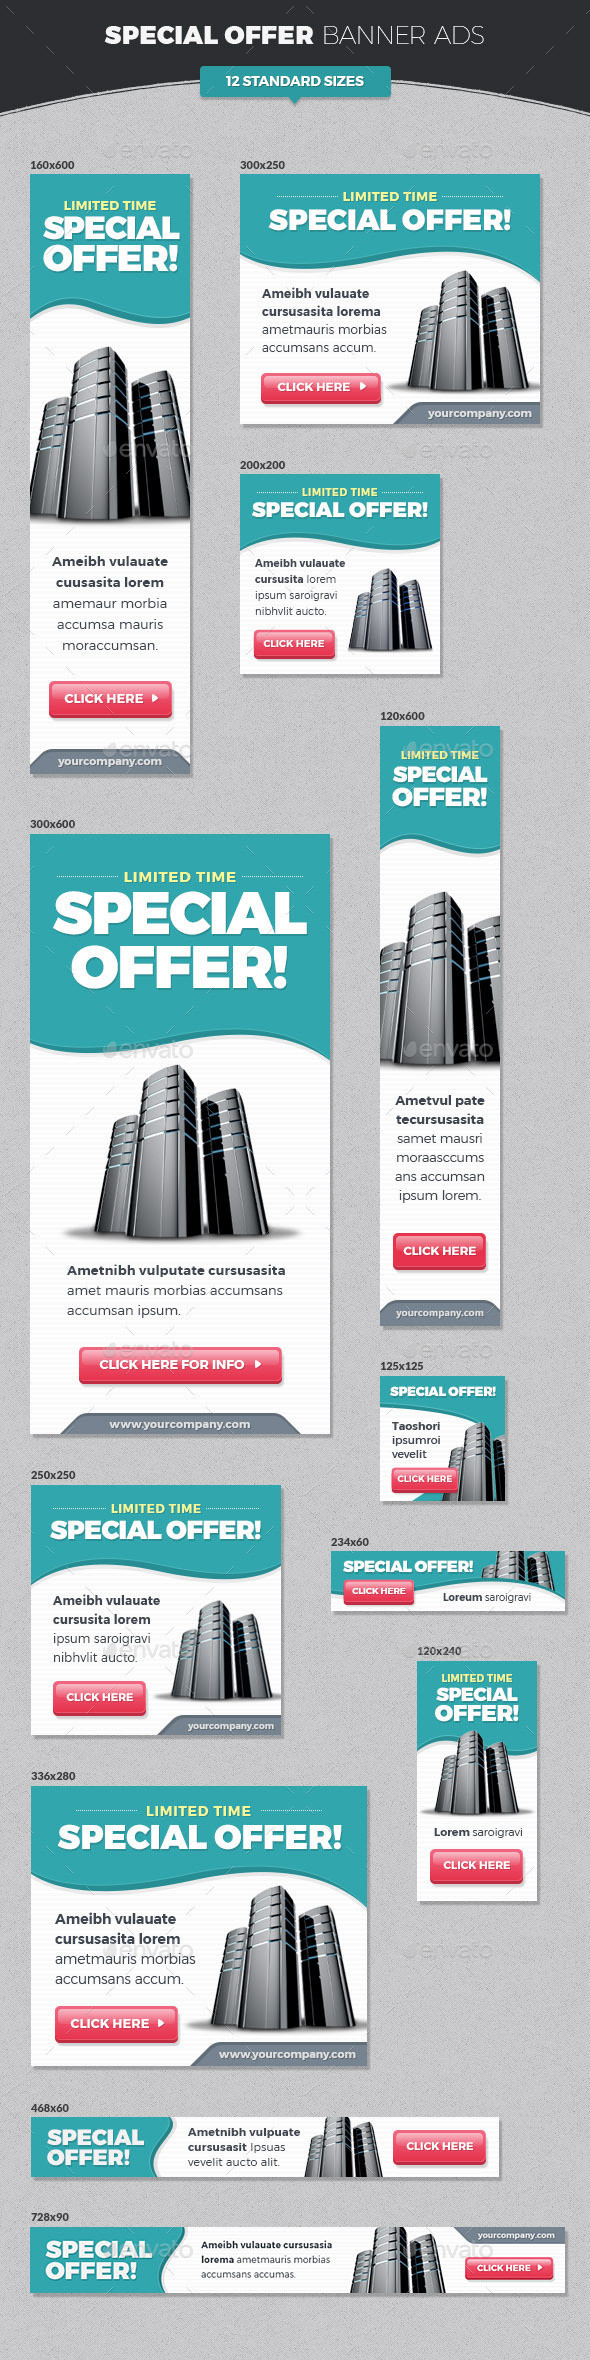 Preview special offer banner ads